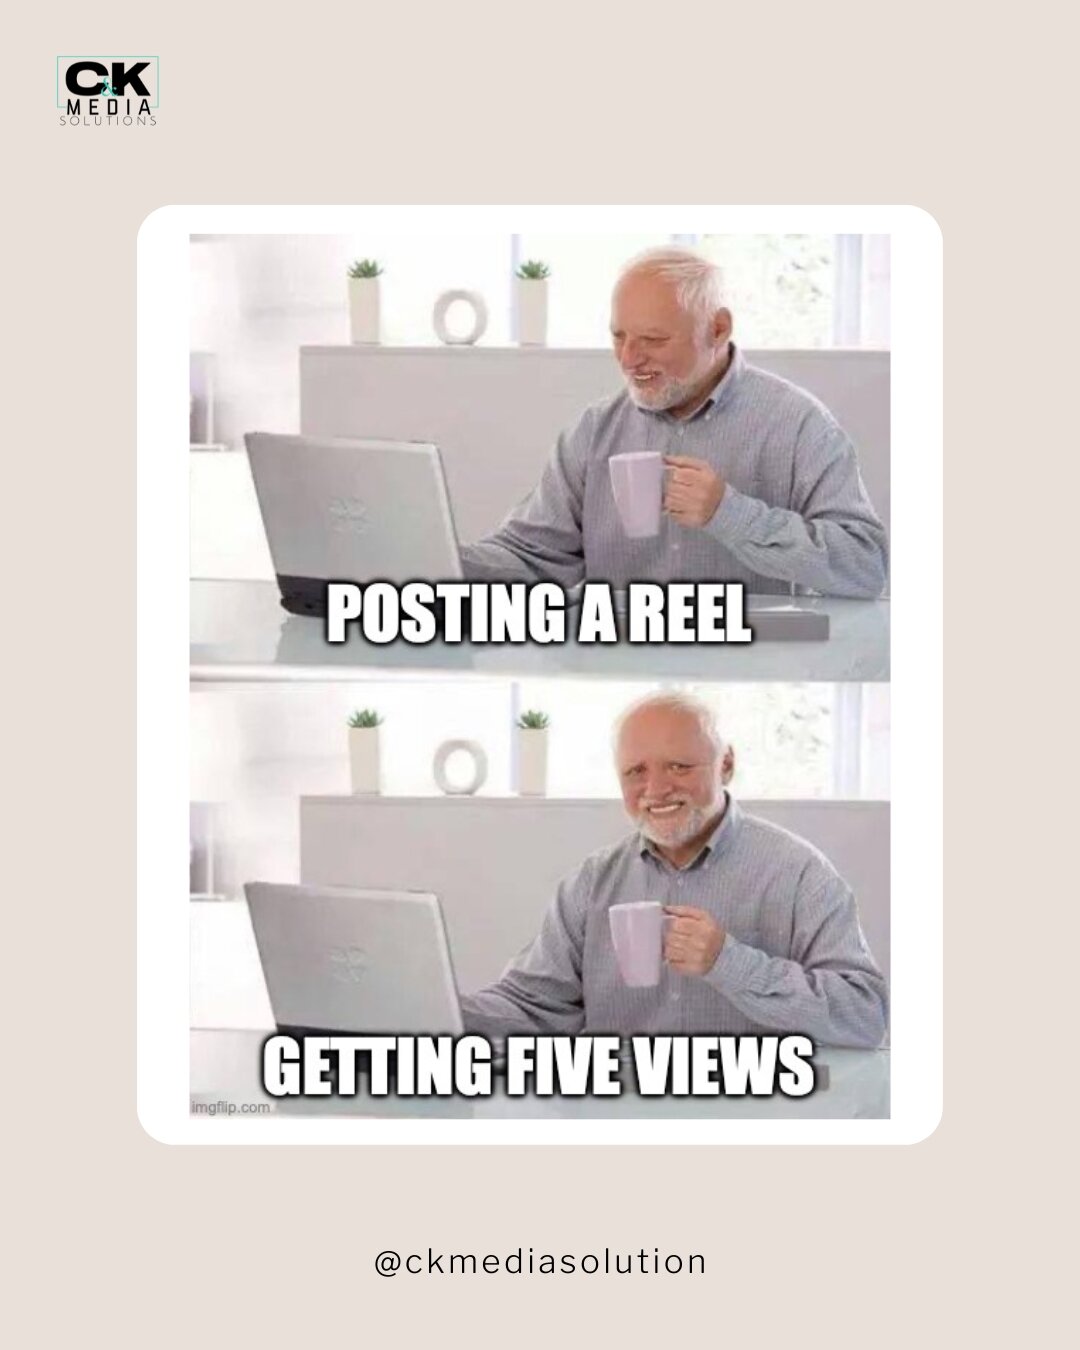 The absolute worst 🫣 not every reel will take off, but who's to say that reel won't take off with thousands of views in 30 days? That's why it's important to never delete your reels. Let them live on, they might end up surprising you!